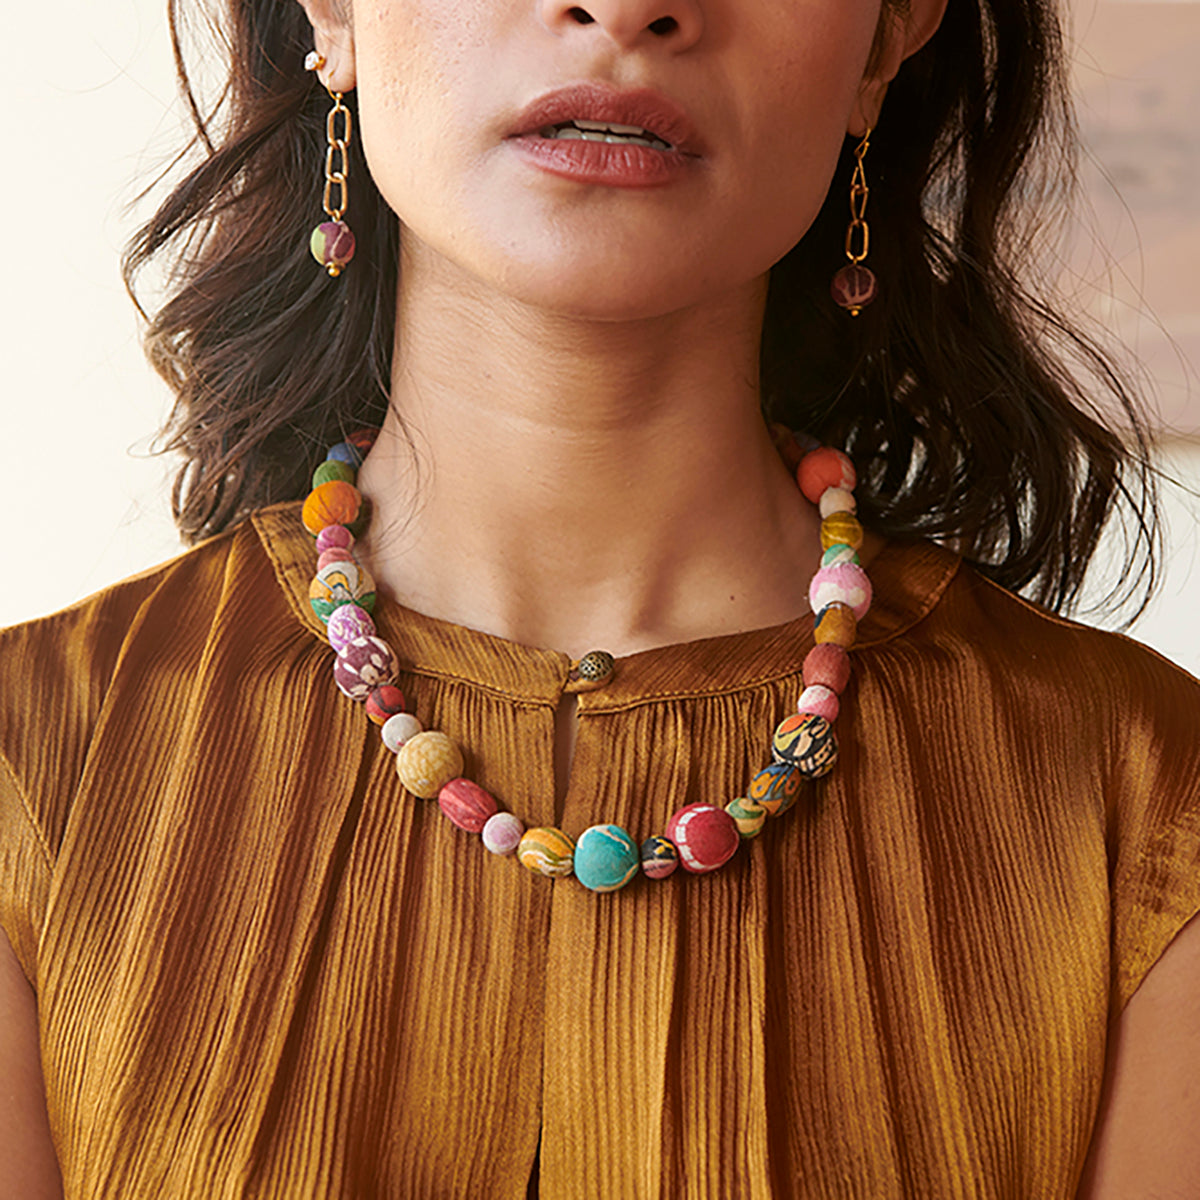 A model wears the Kantha Calysta Necklace.